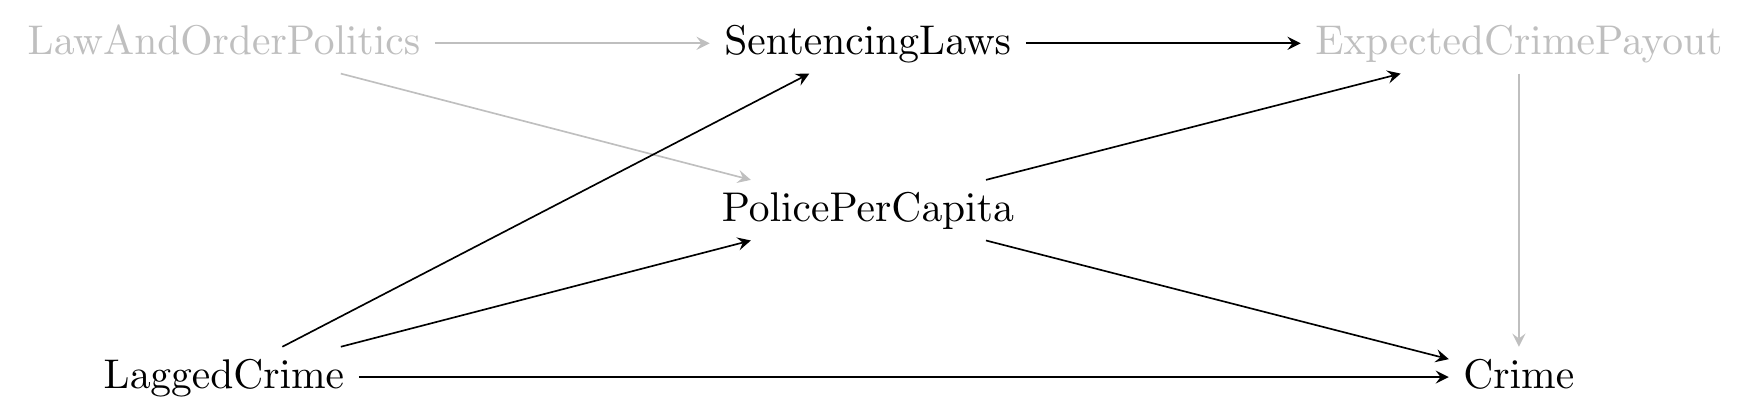 A causal diagram where Crime is caused by Lagged Crime, Police per Capita, and Expected Crime Payout. Lagged Crime and Law and Order Politics both cause Police Per Capita and Sentencing Laws, both of which then cause Expected Crime Payout.